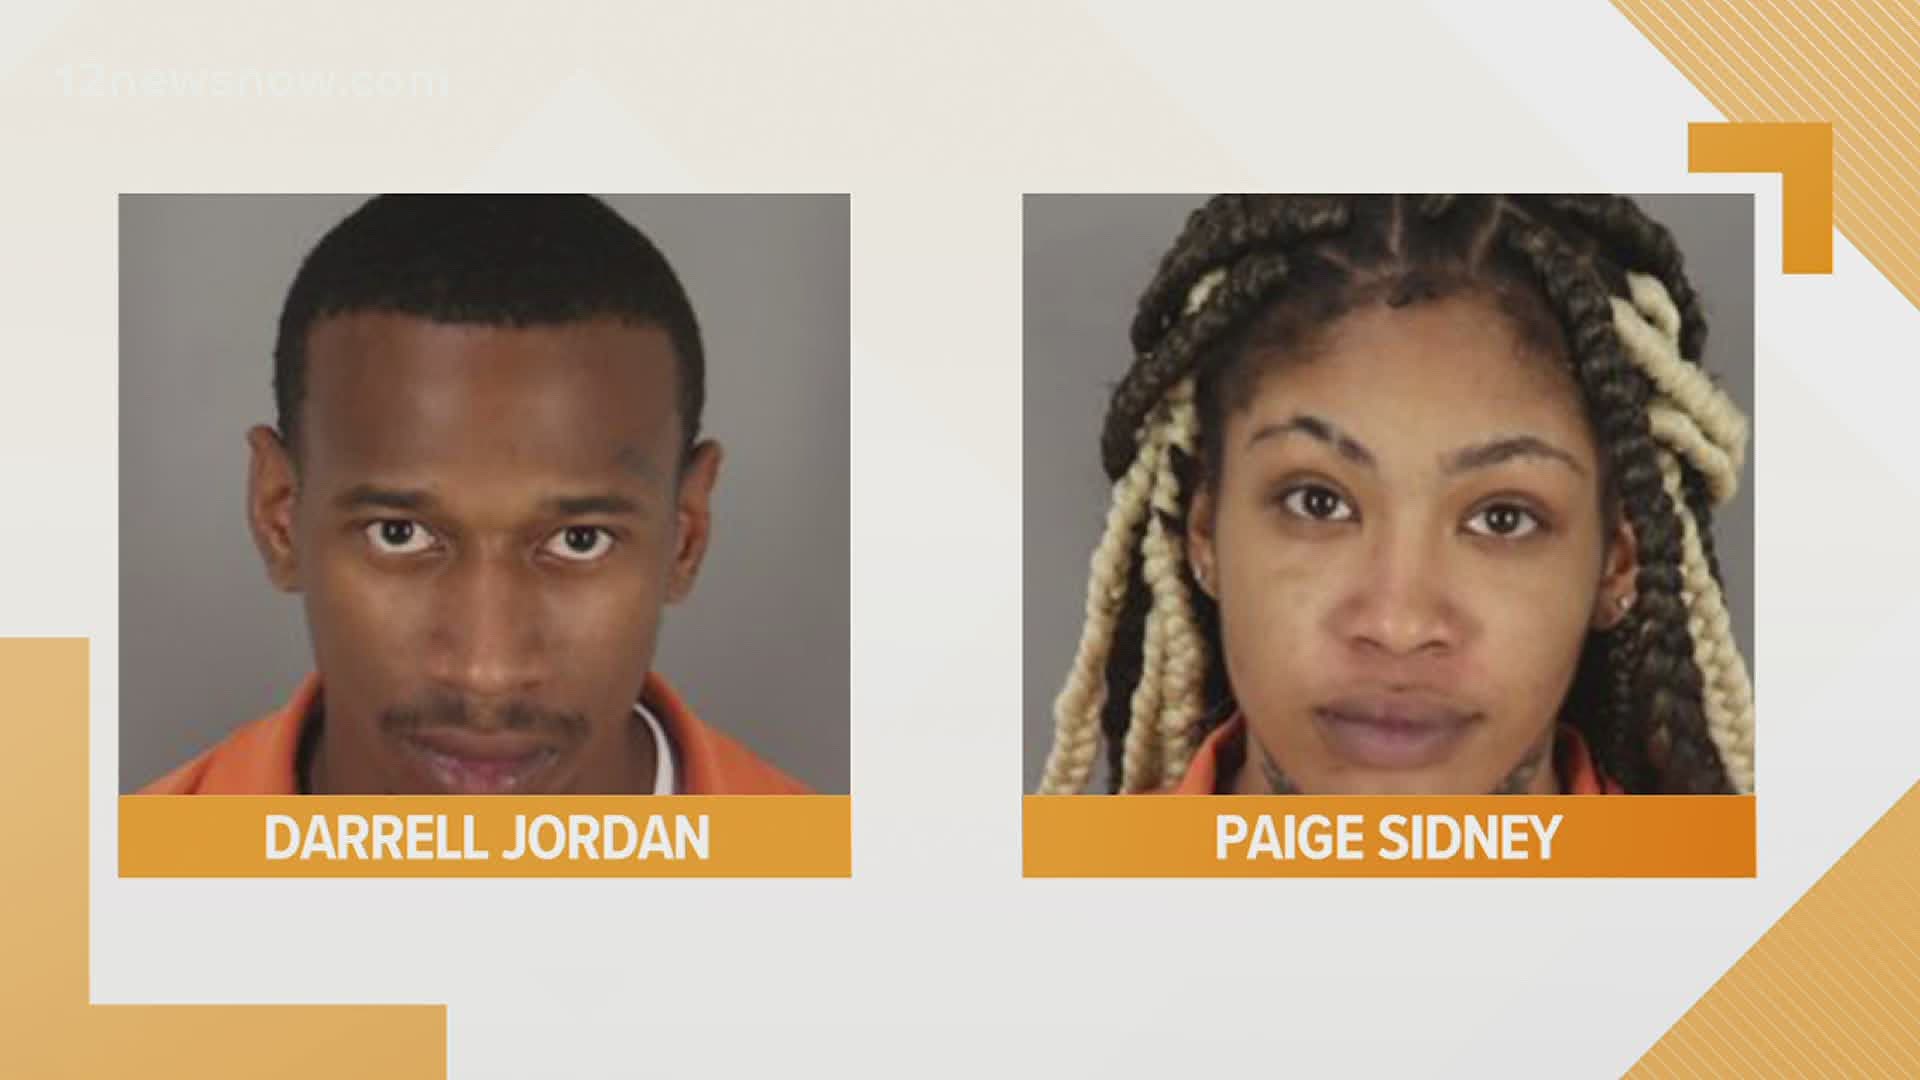 Paige Sidney and Darrell Jordan were indicted on the first degree felony charges on Wednesday